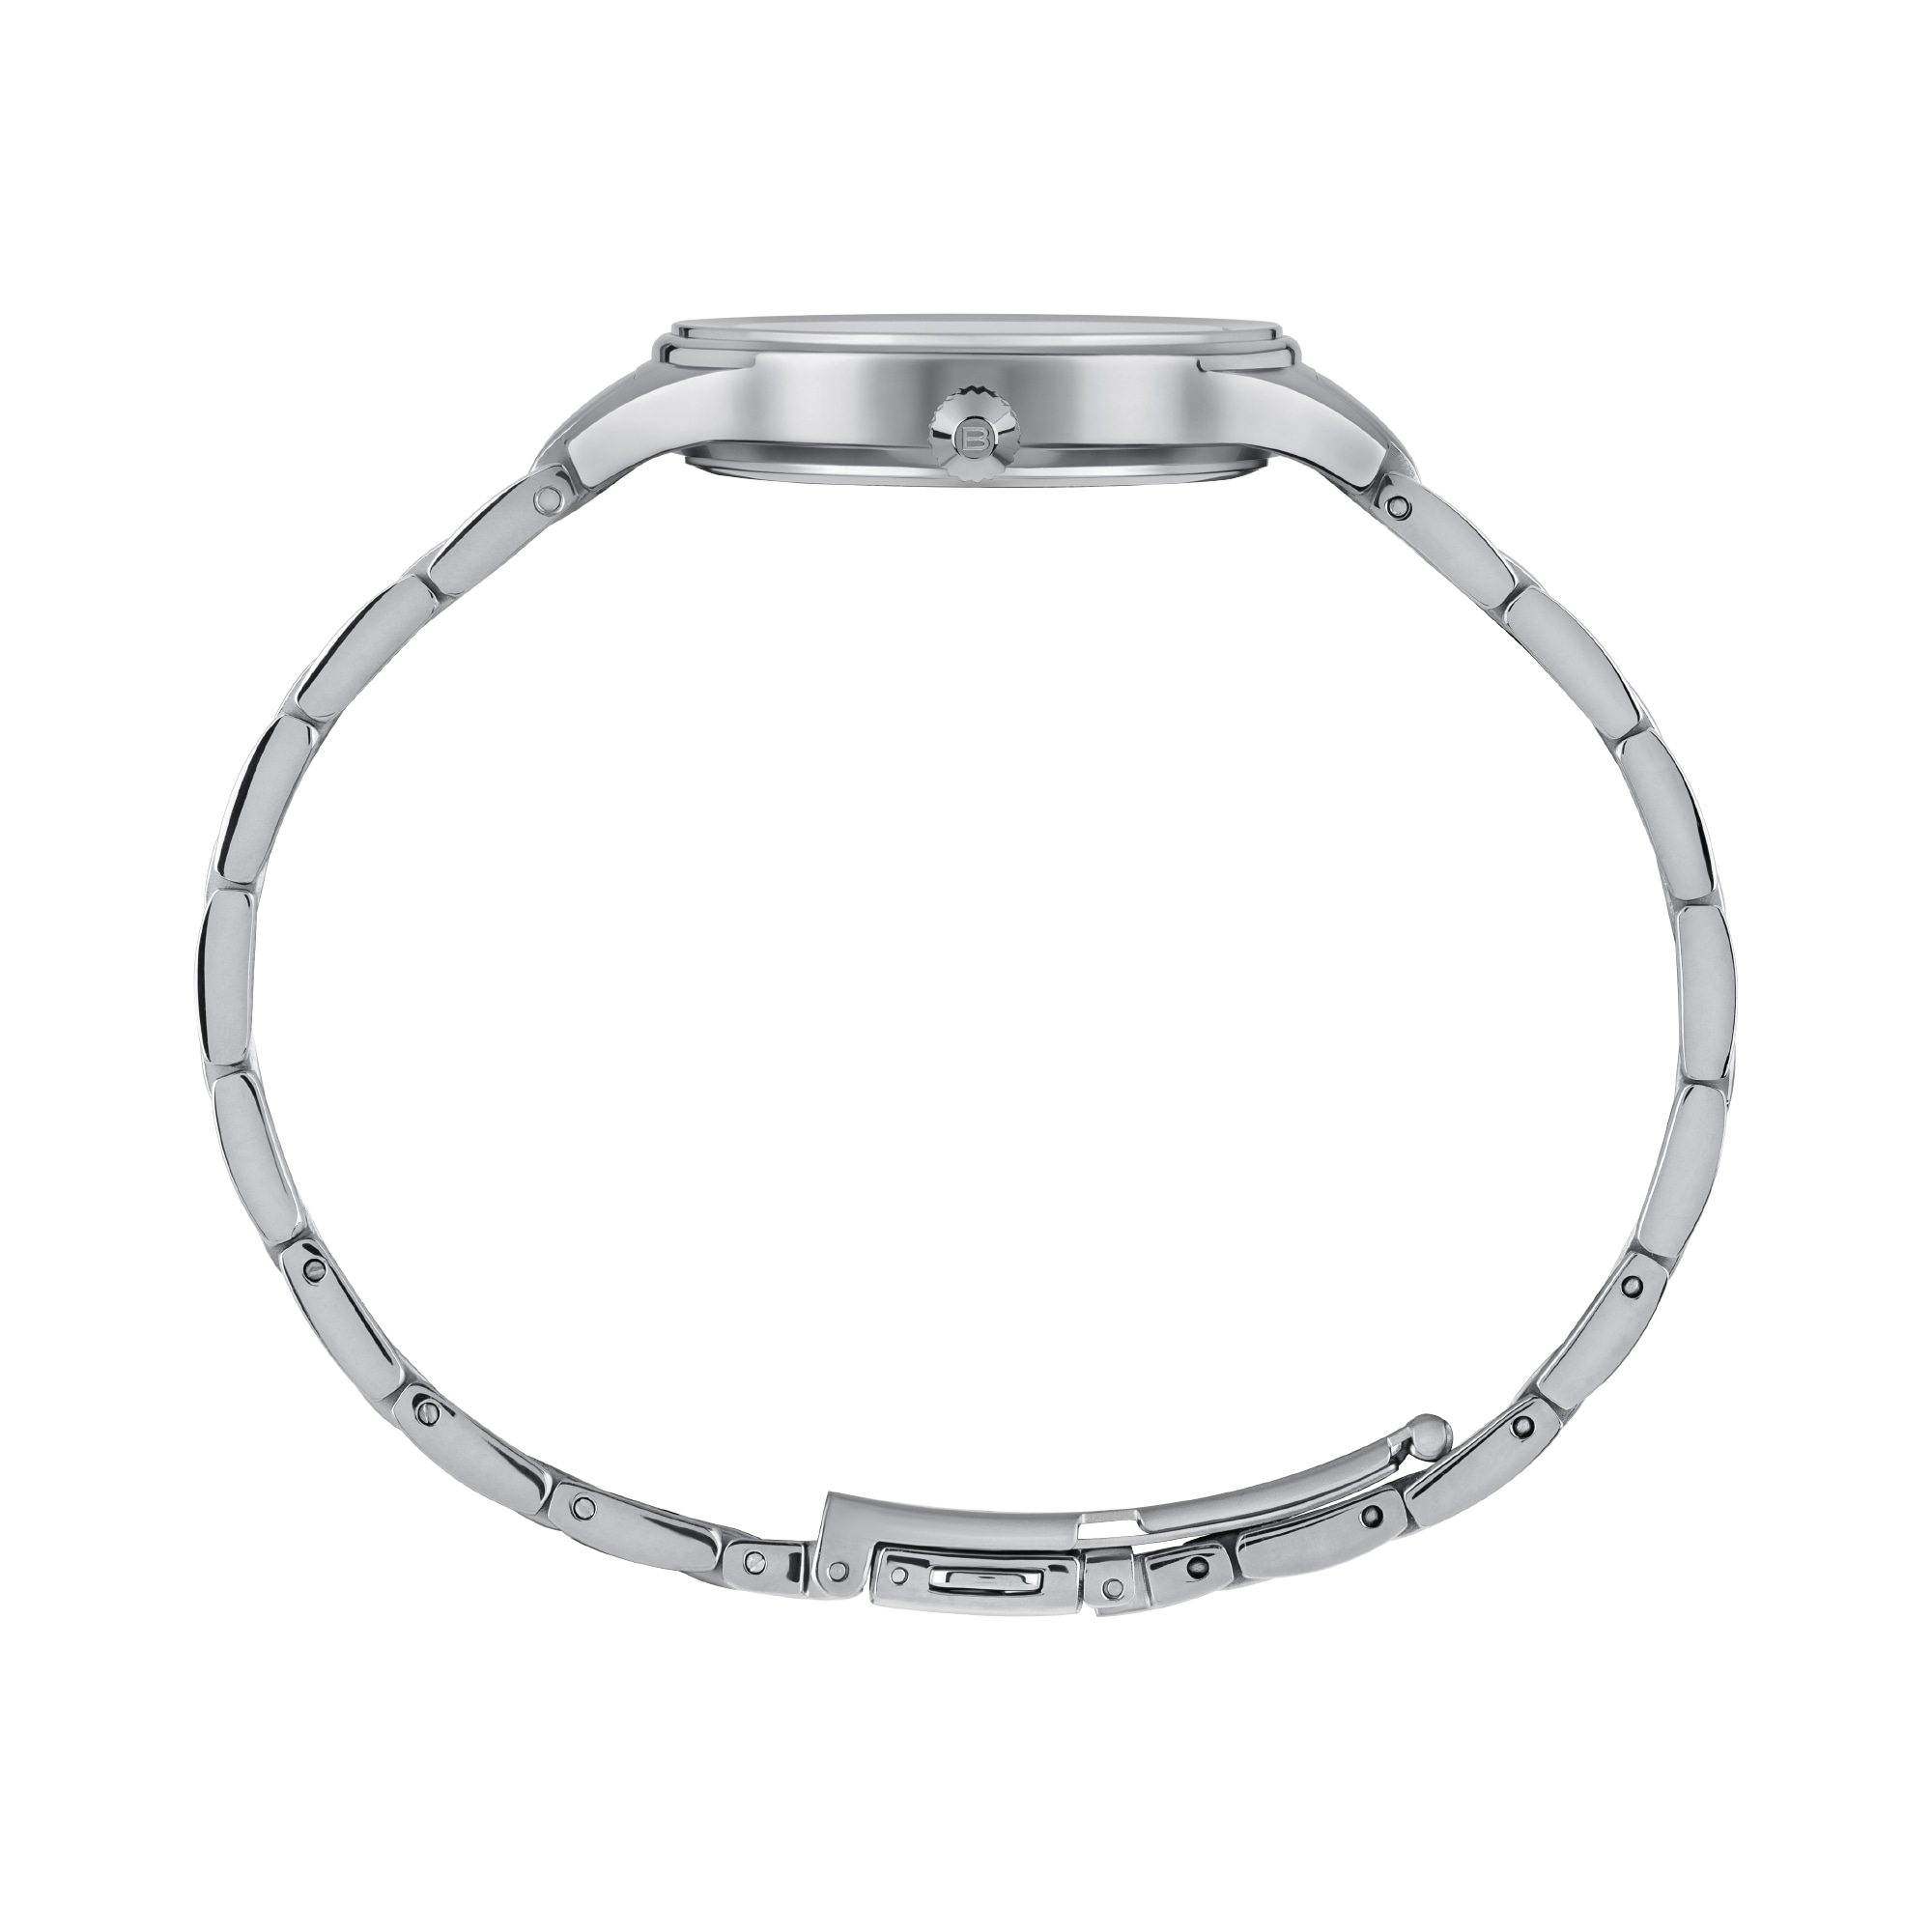 SHEER - TIME ONLY LADY 32 MM - 2 - TW1996 | Breil